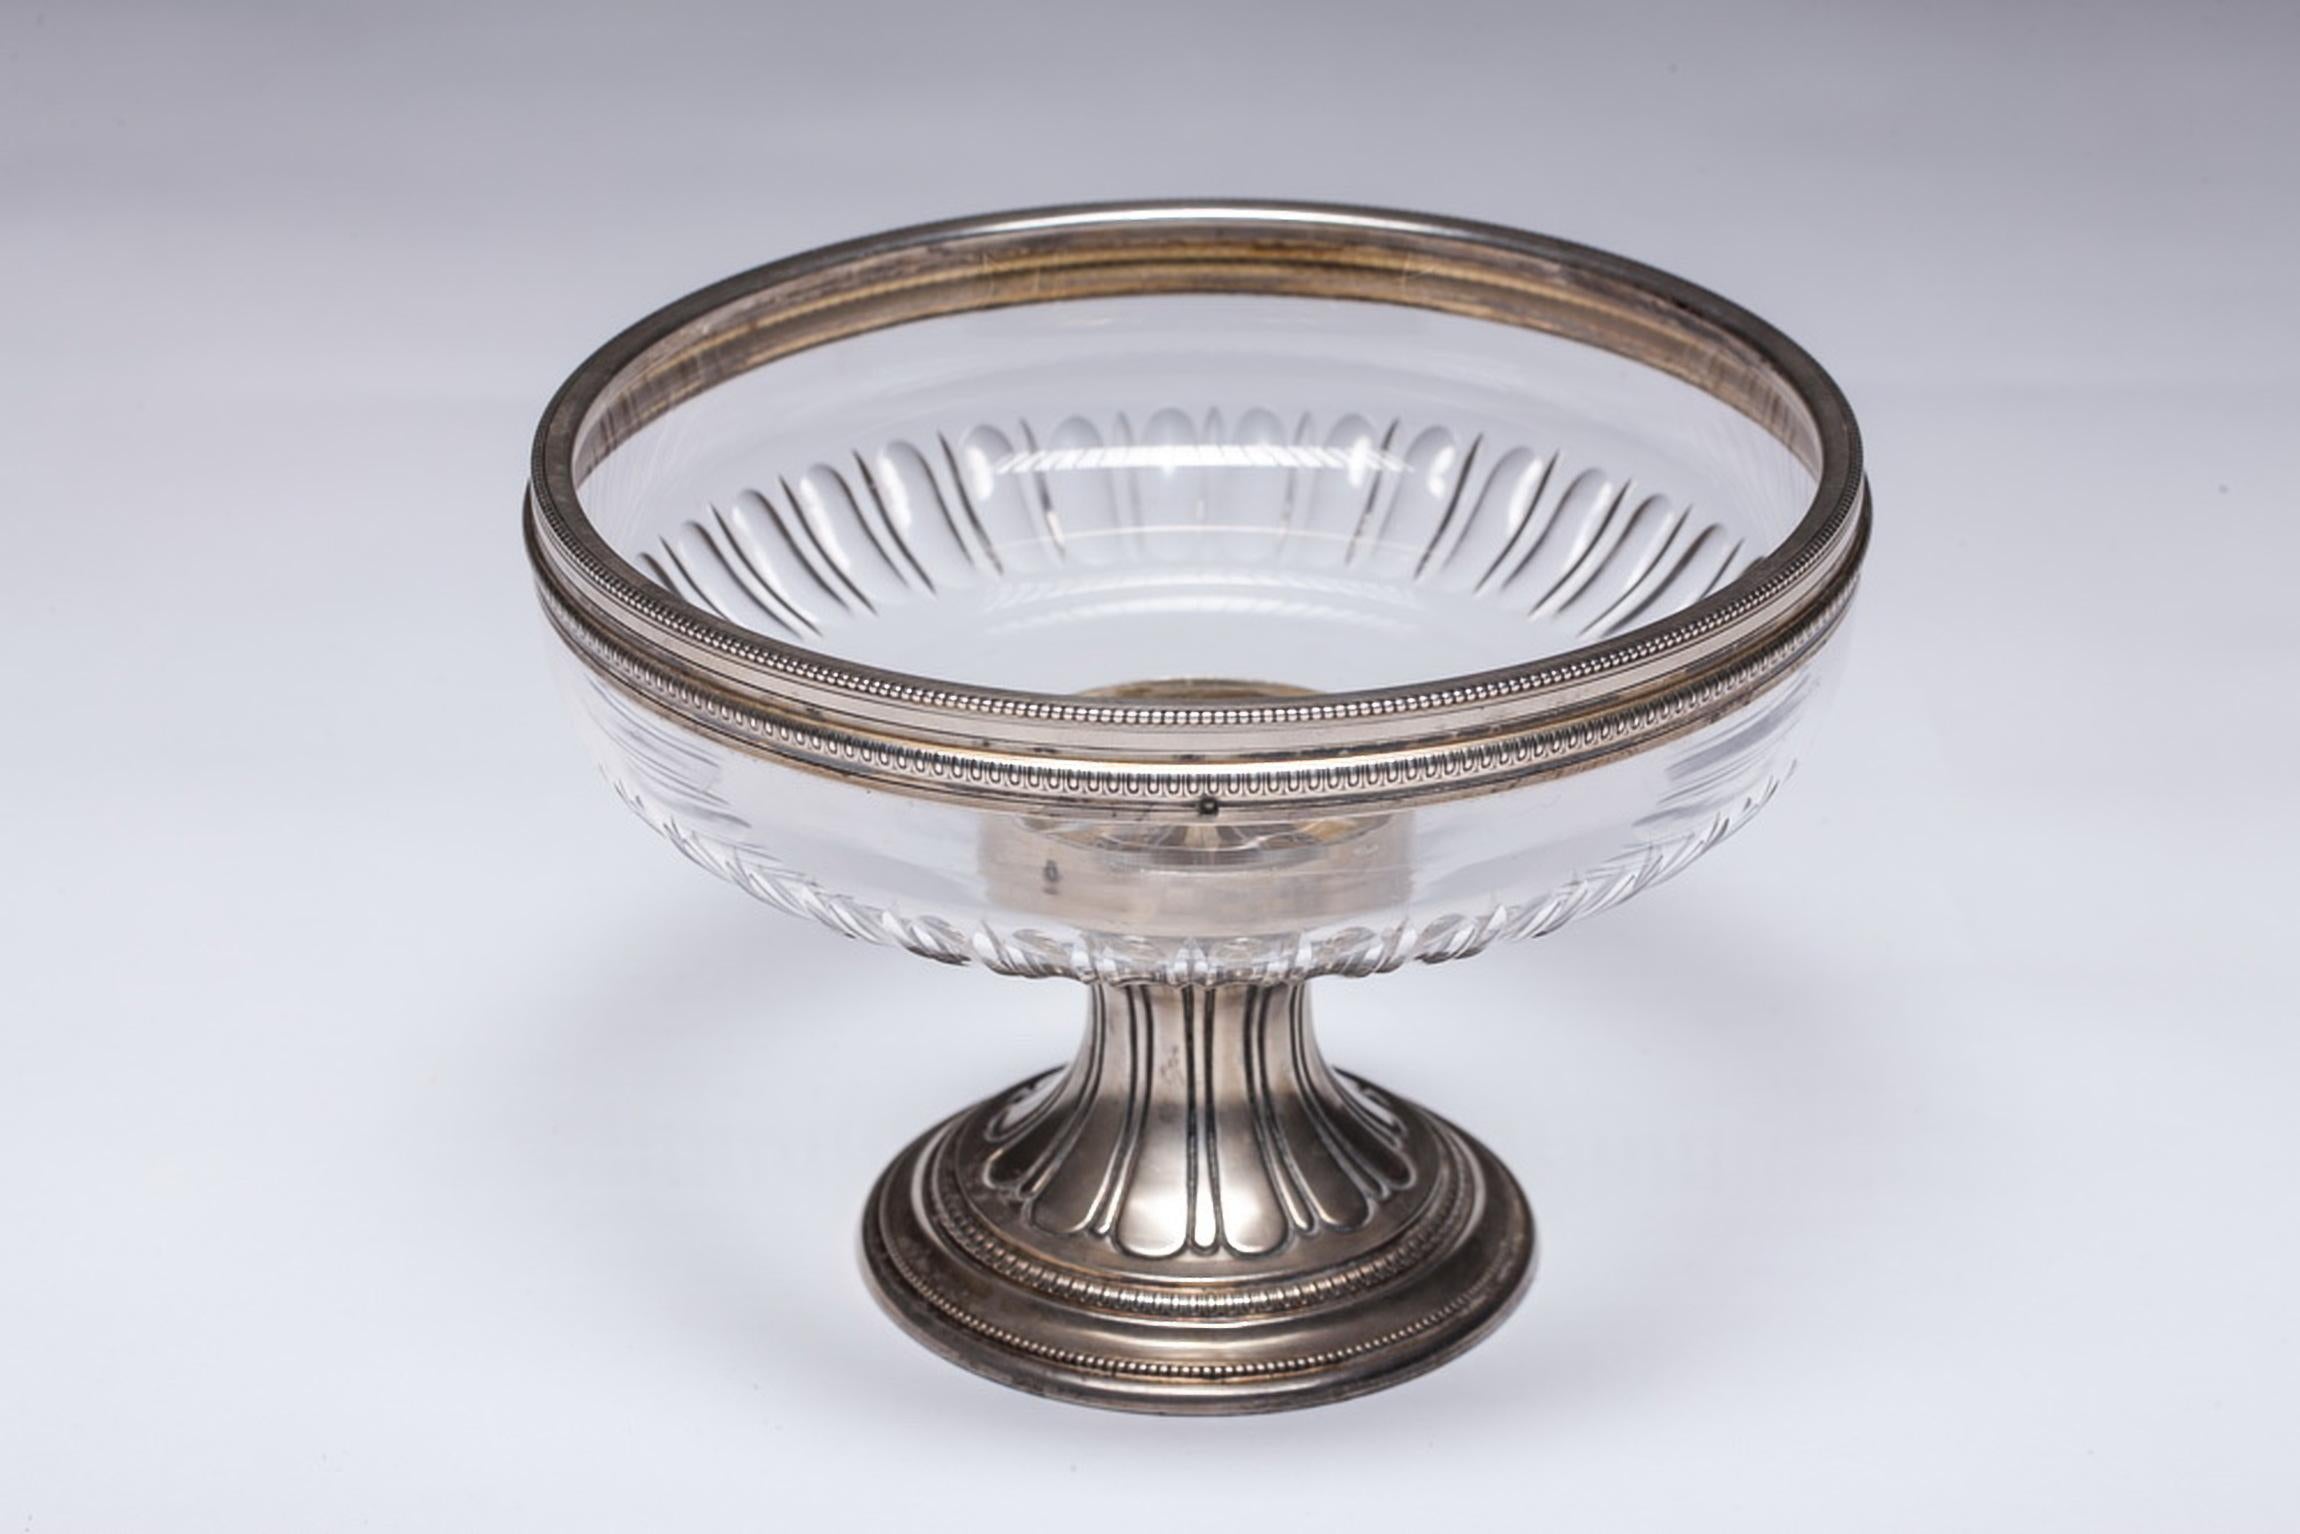 Superb and authentic antique French Napoleon III silver plated centerpiece 19th century stamped on foot.
The centerpiece is topped with a round cut-glass bowl, and has silver base. The piece is in good condition with fine detailed work.

 